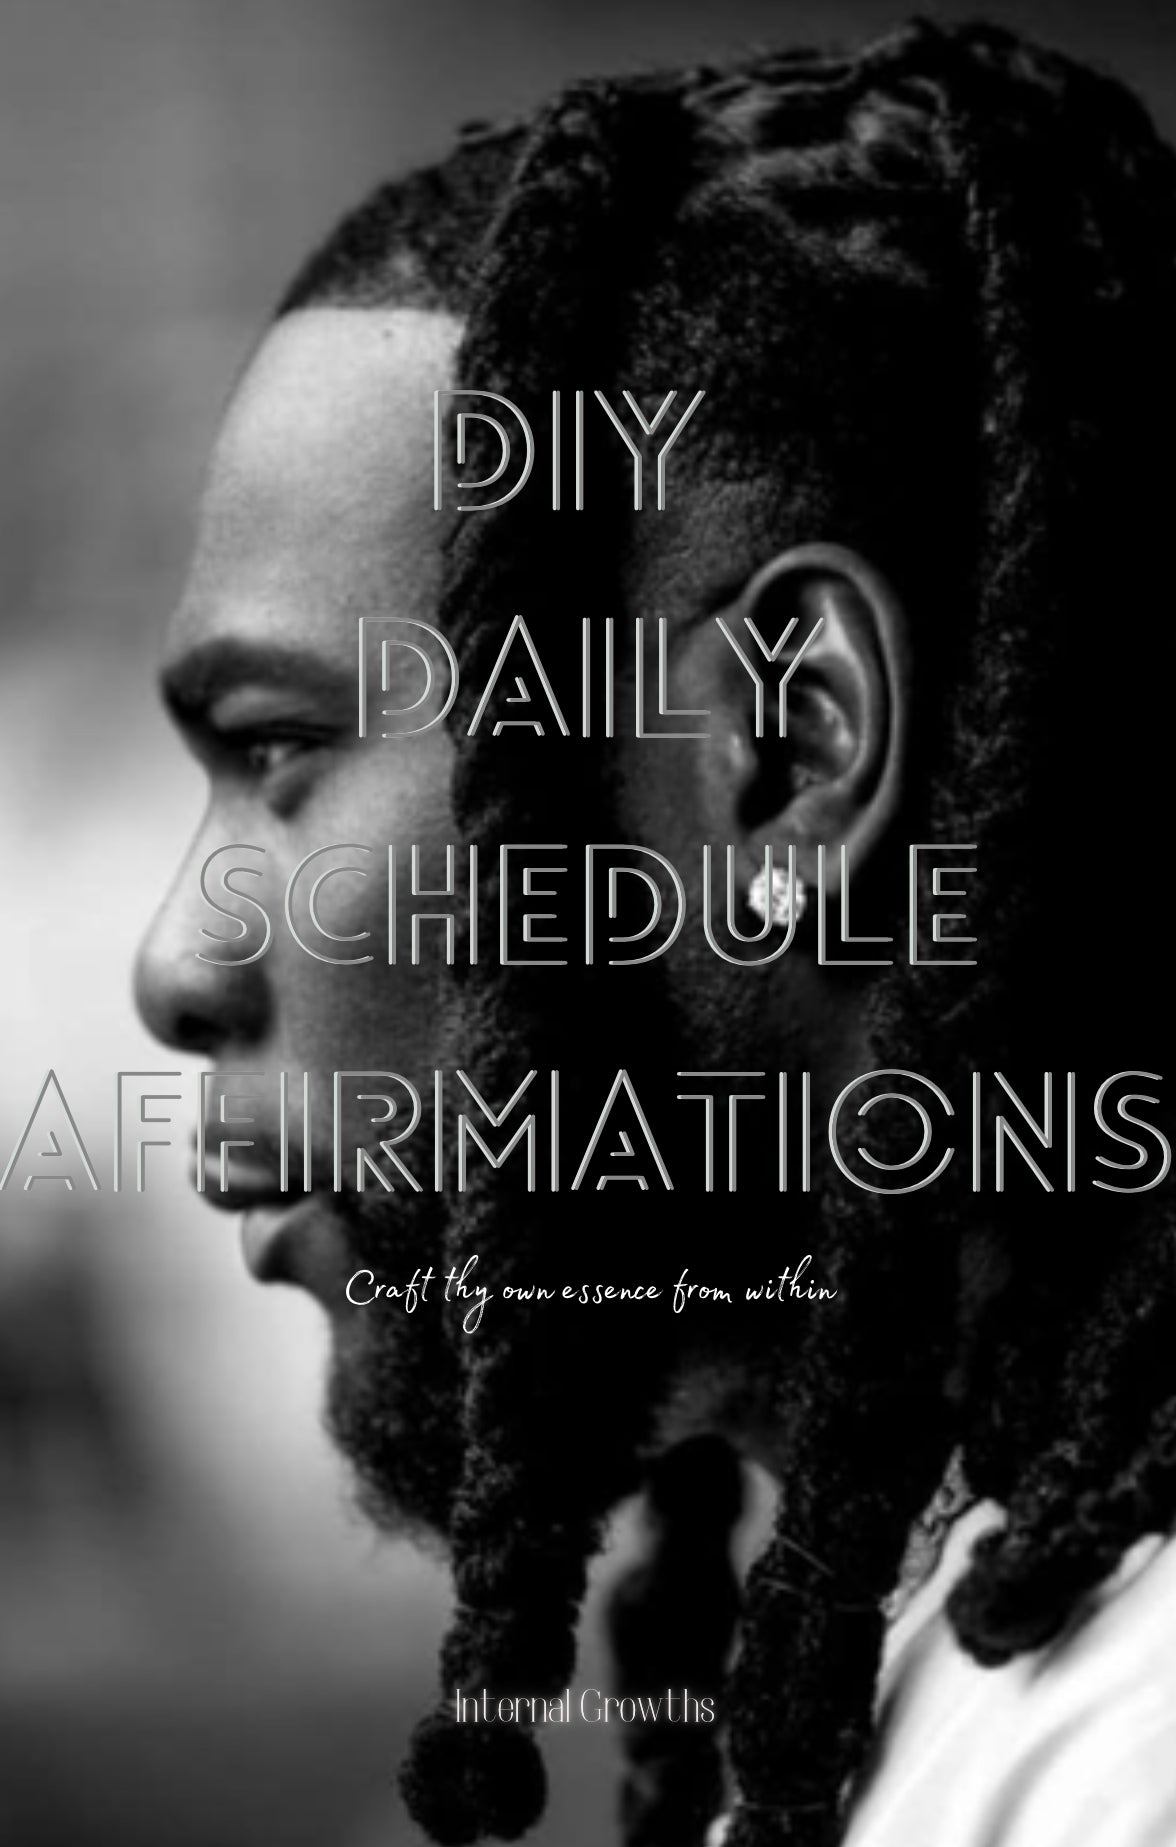 DIY Daily Schedule Affirmations